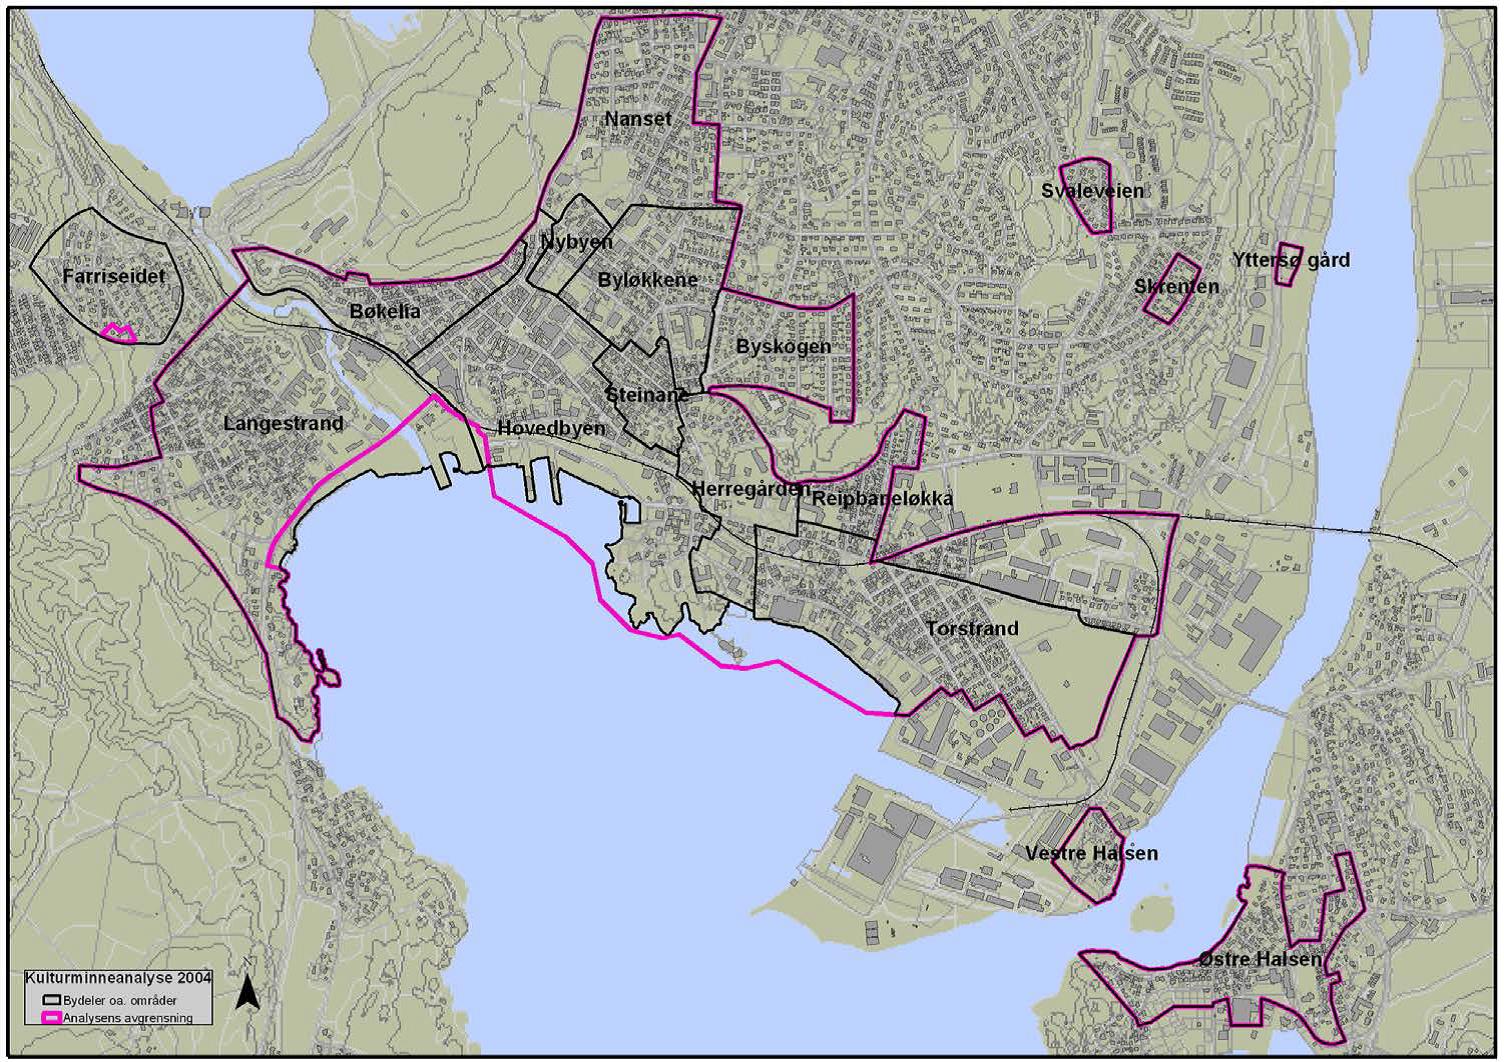 The different areas of Larvik’s development before WWII